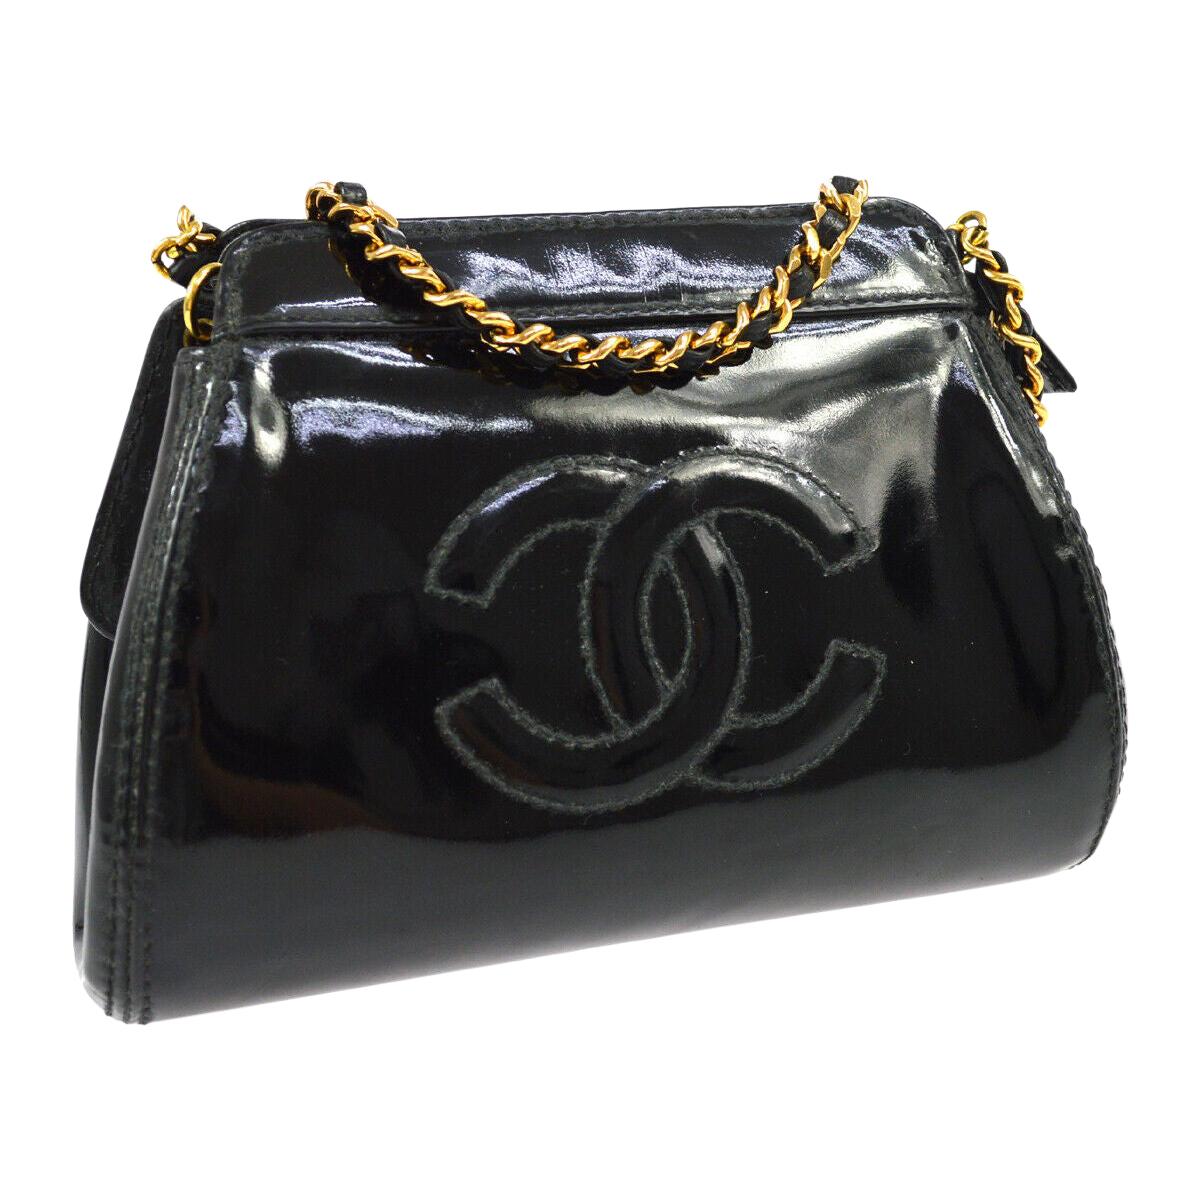 Chanel Black Patent Leather Gold Small Mini Party Shoulder Bag in Box